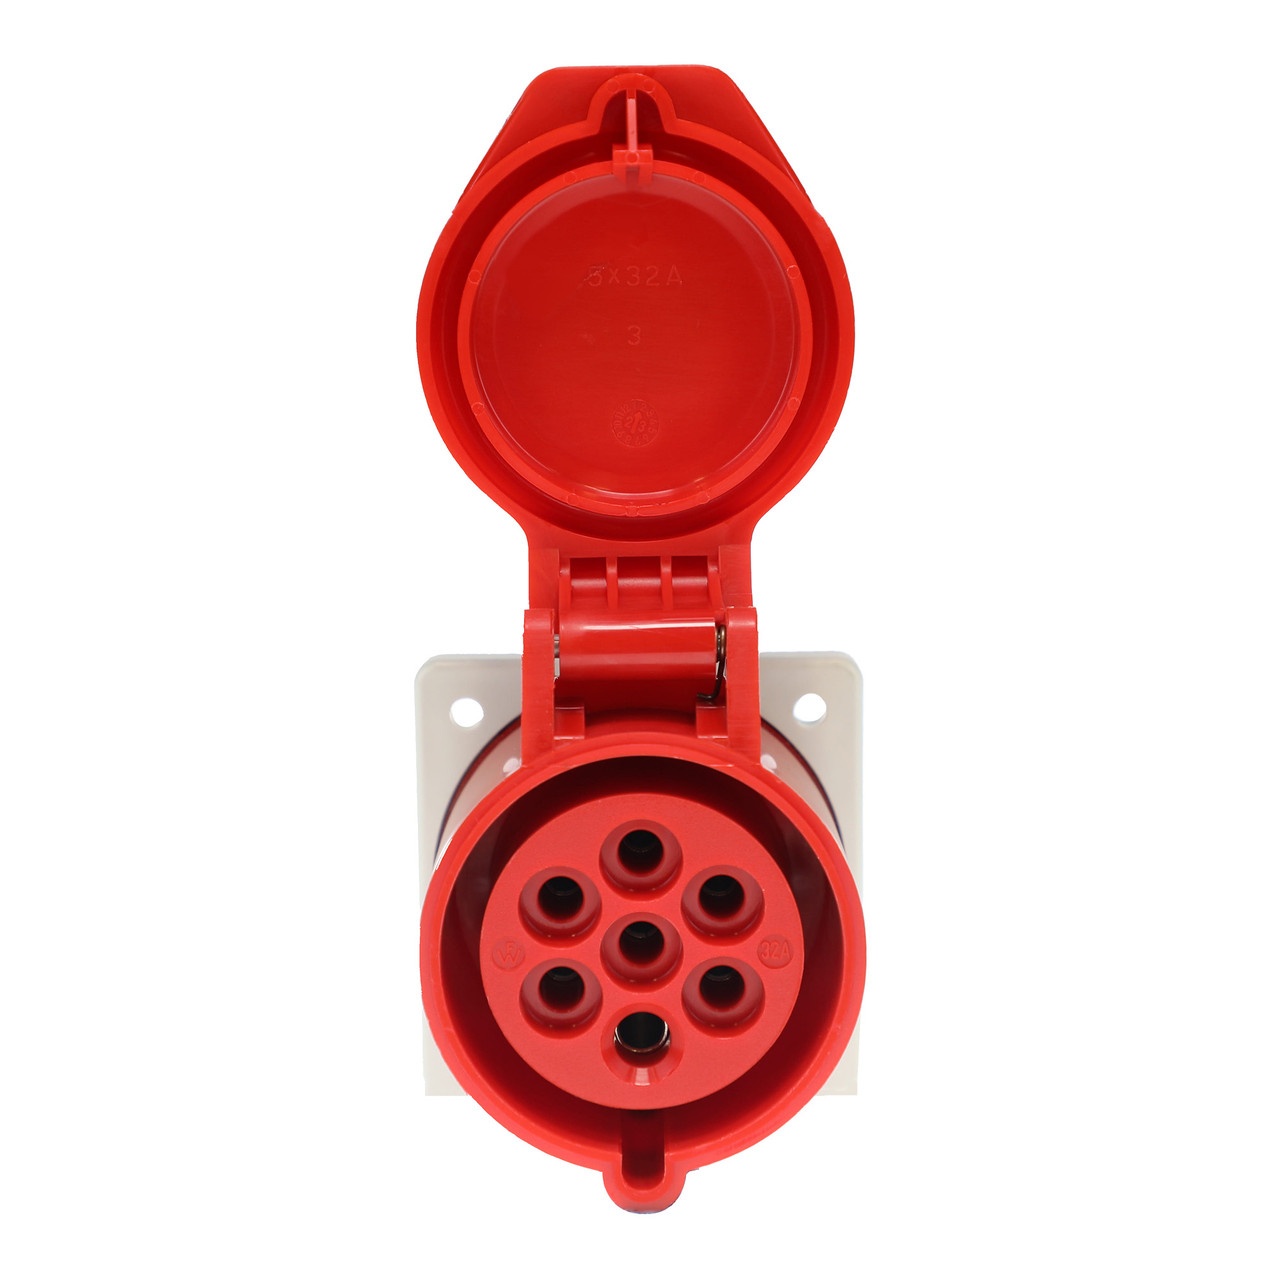 Walther Electric 431706 Pin and Sleeve Receptacle 32A 7 Wire 400 VAC 6Hr IP44 Splashproof - Industrial Grade IEC (Red)